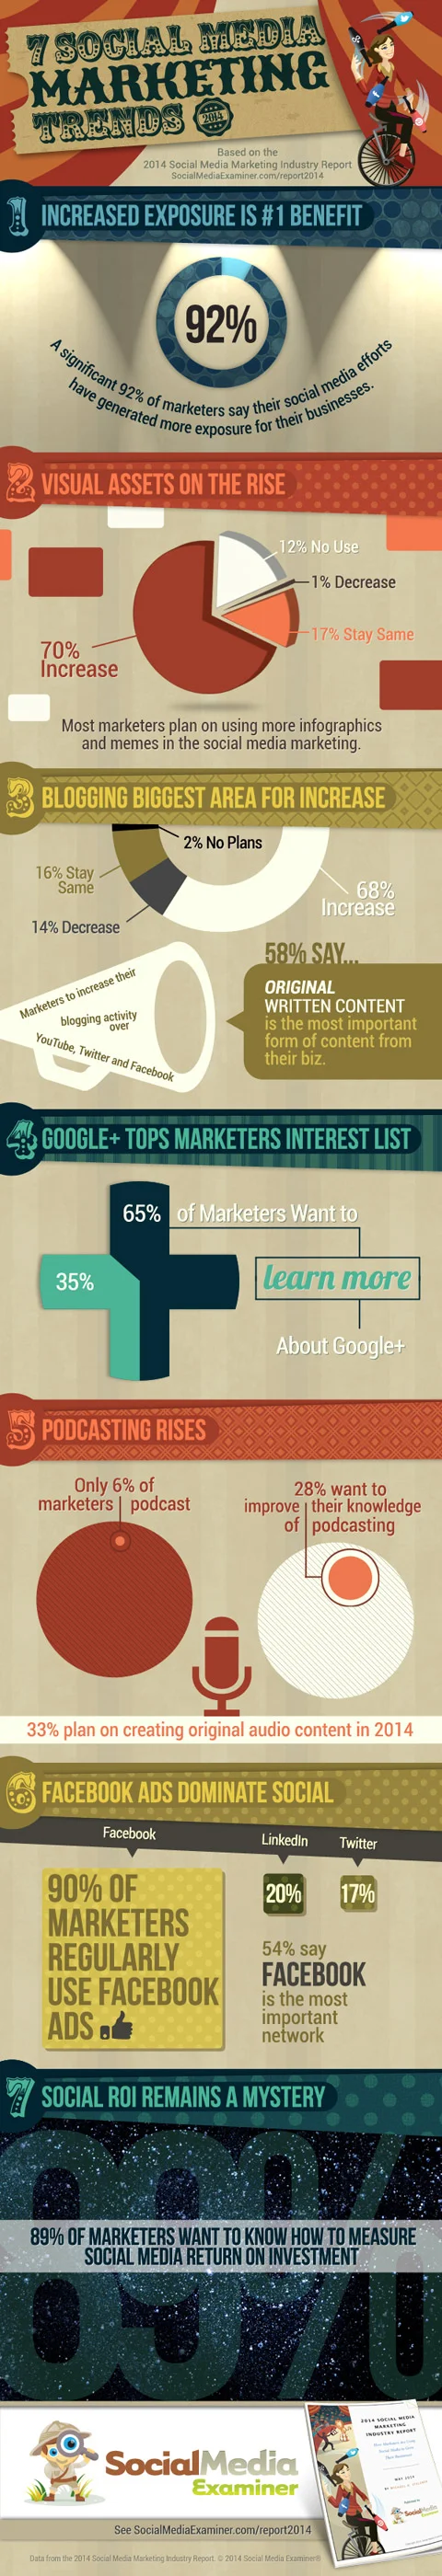 7 #SocialMedia Trends for Marketers: #infographic #marketing